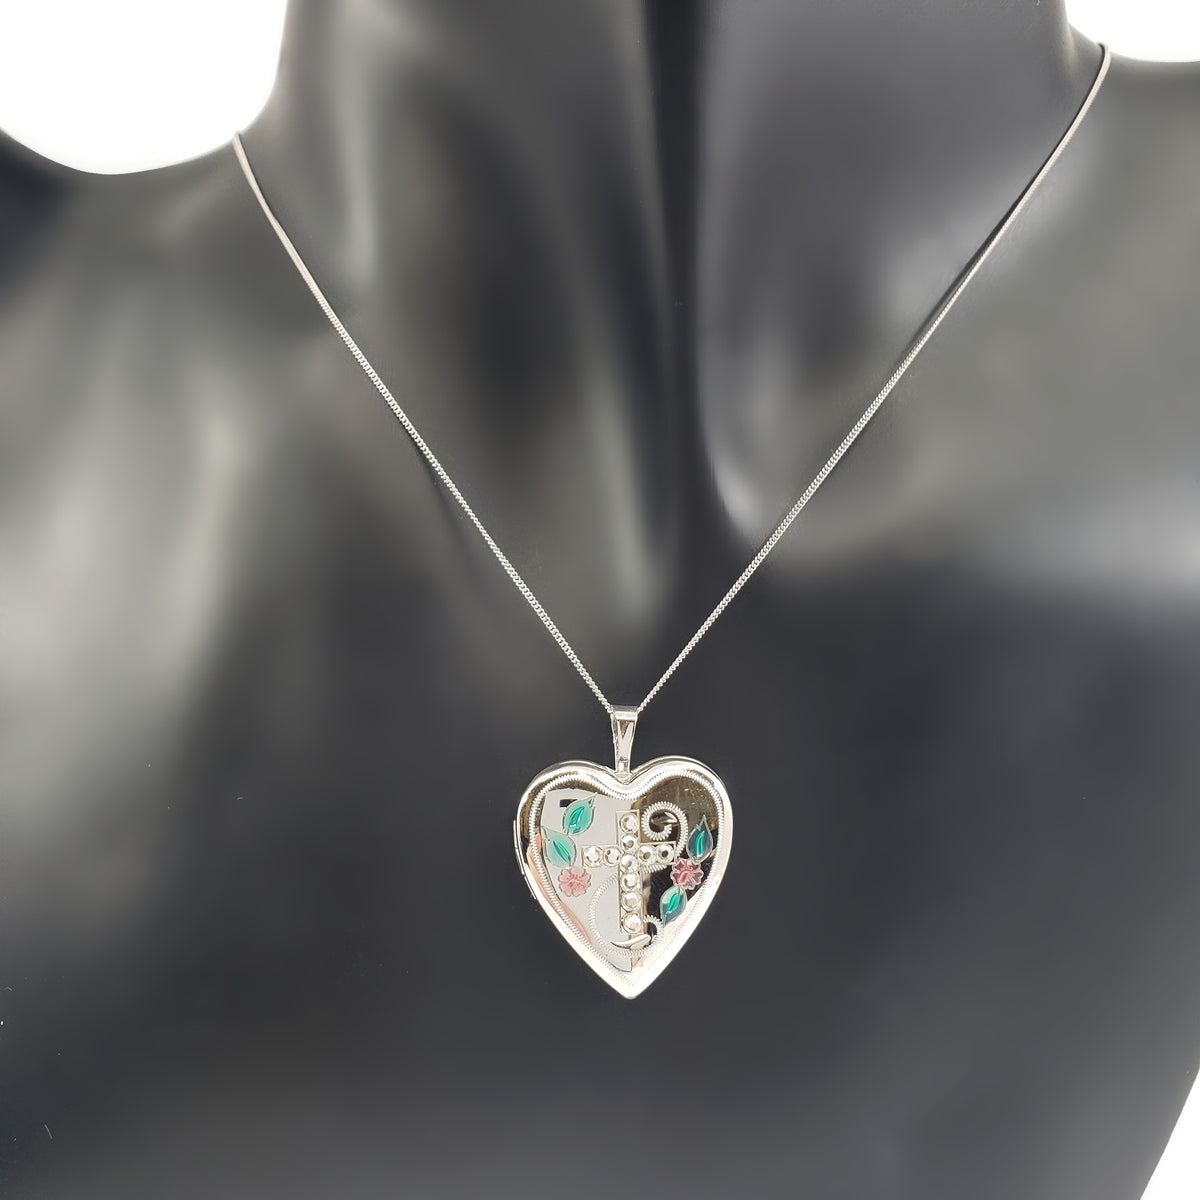 925 Sterling Silver Locket with Cubic Zirconia Cross and Decals with Chain - 18 Inches